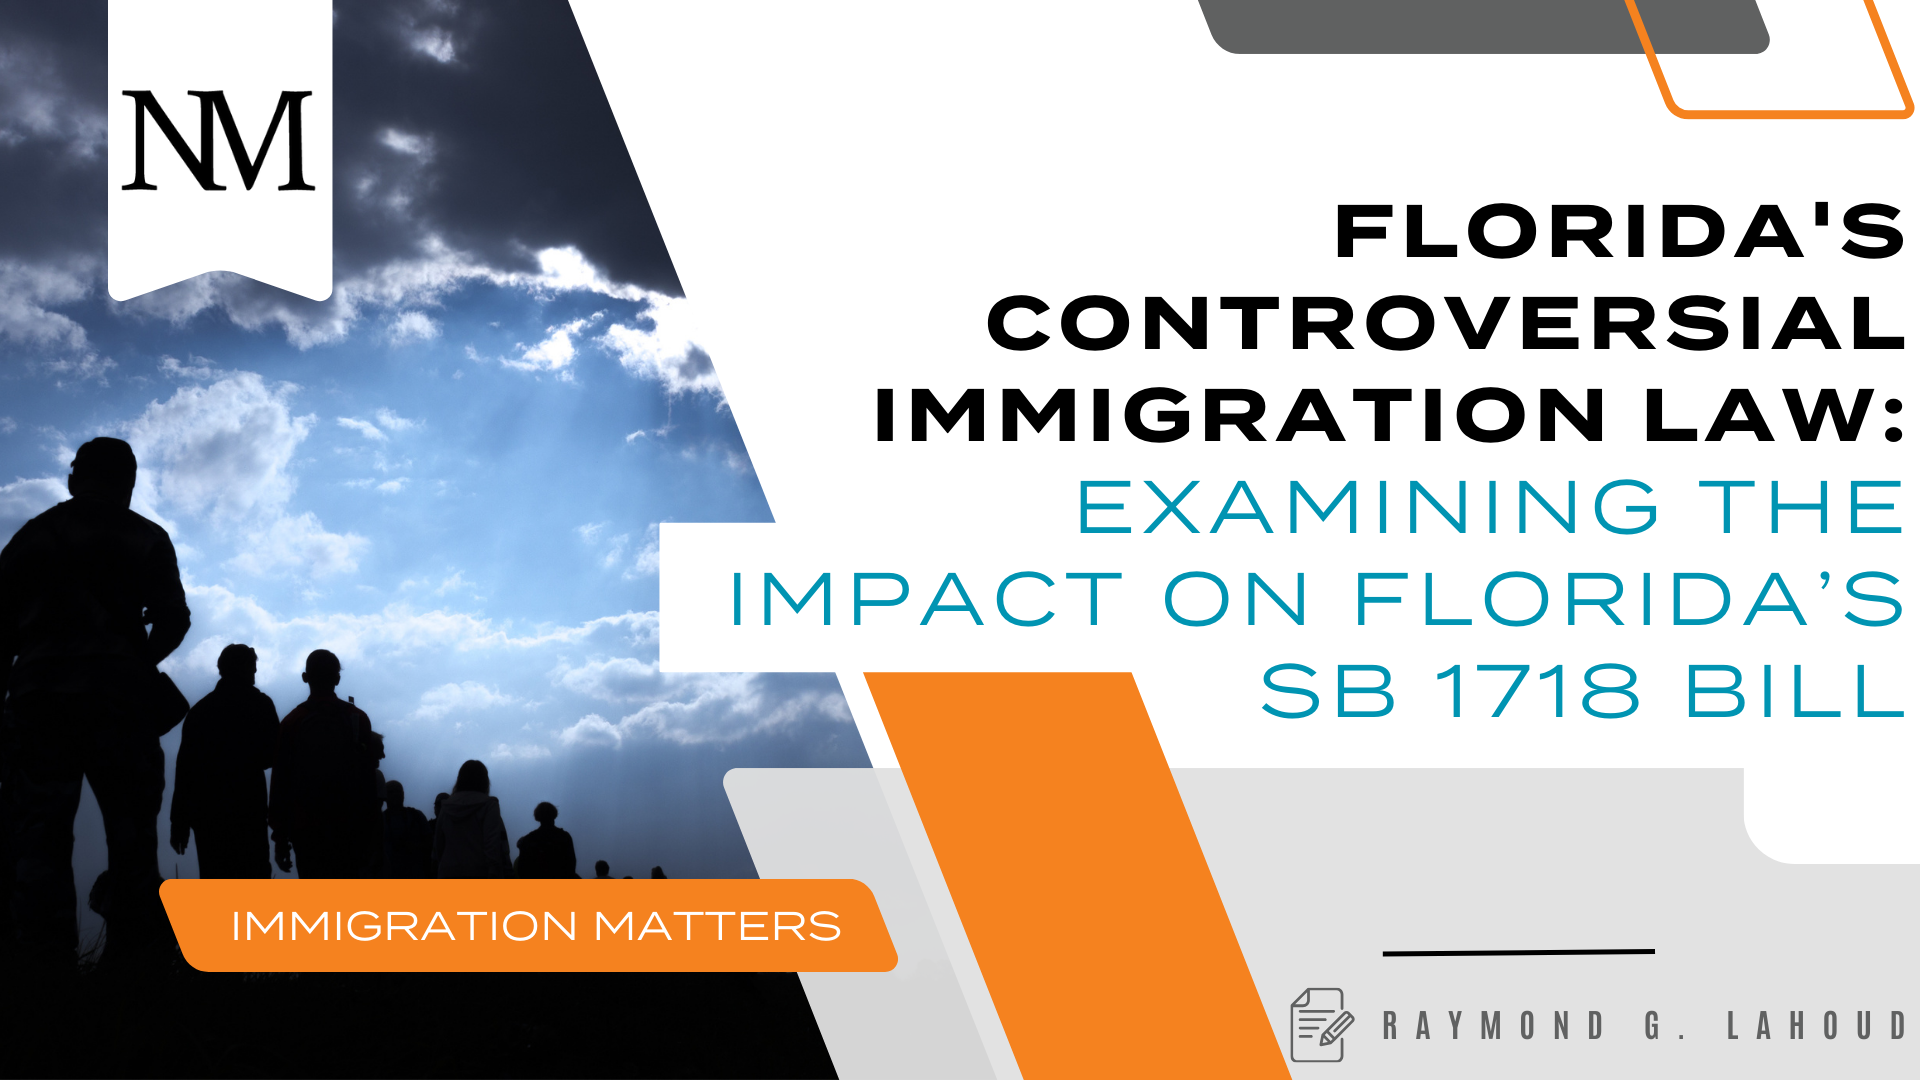 Florida's Controversial Immigration Law: Examining the Impact